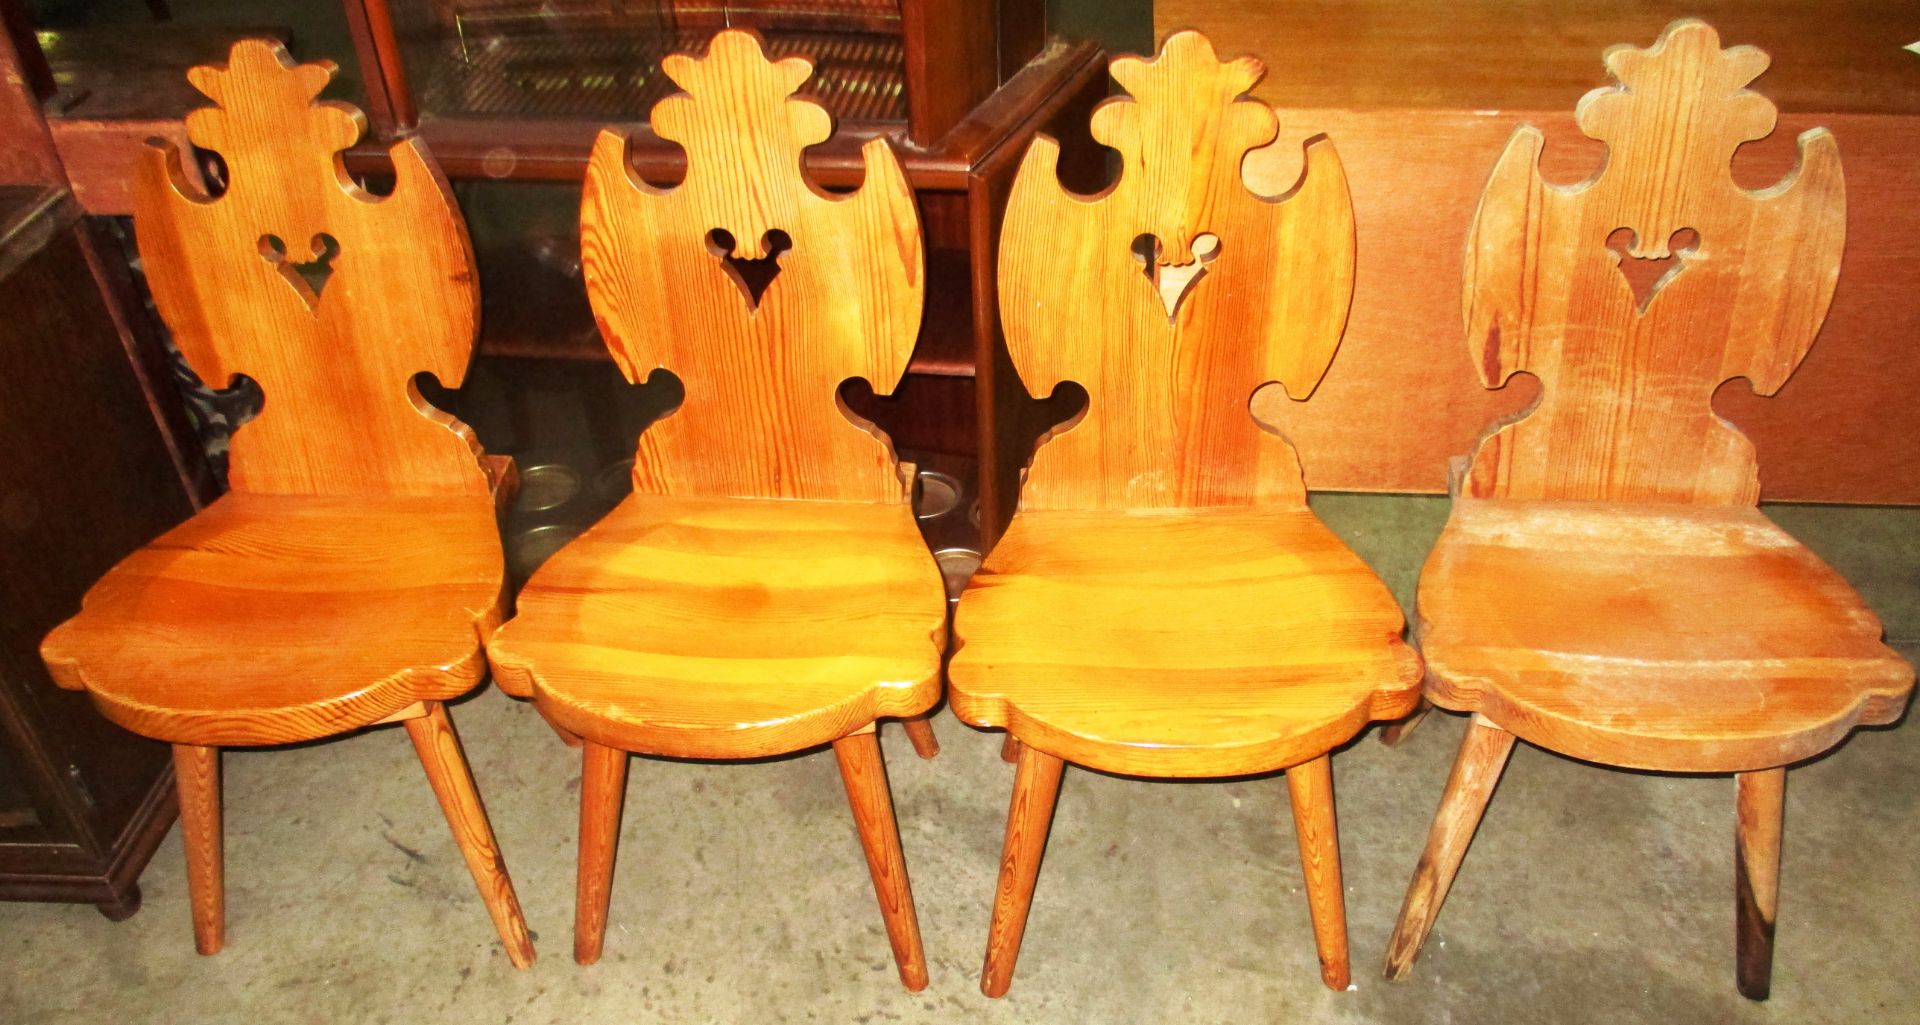 Four pine dining chairs